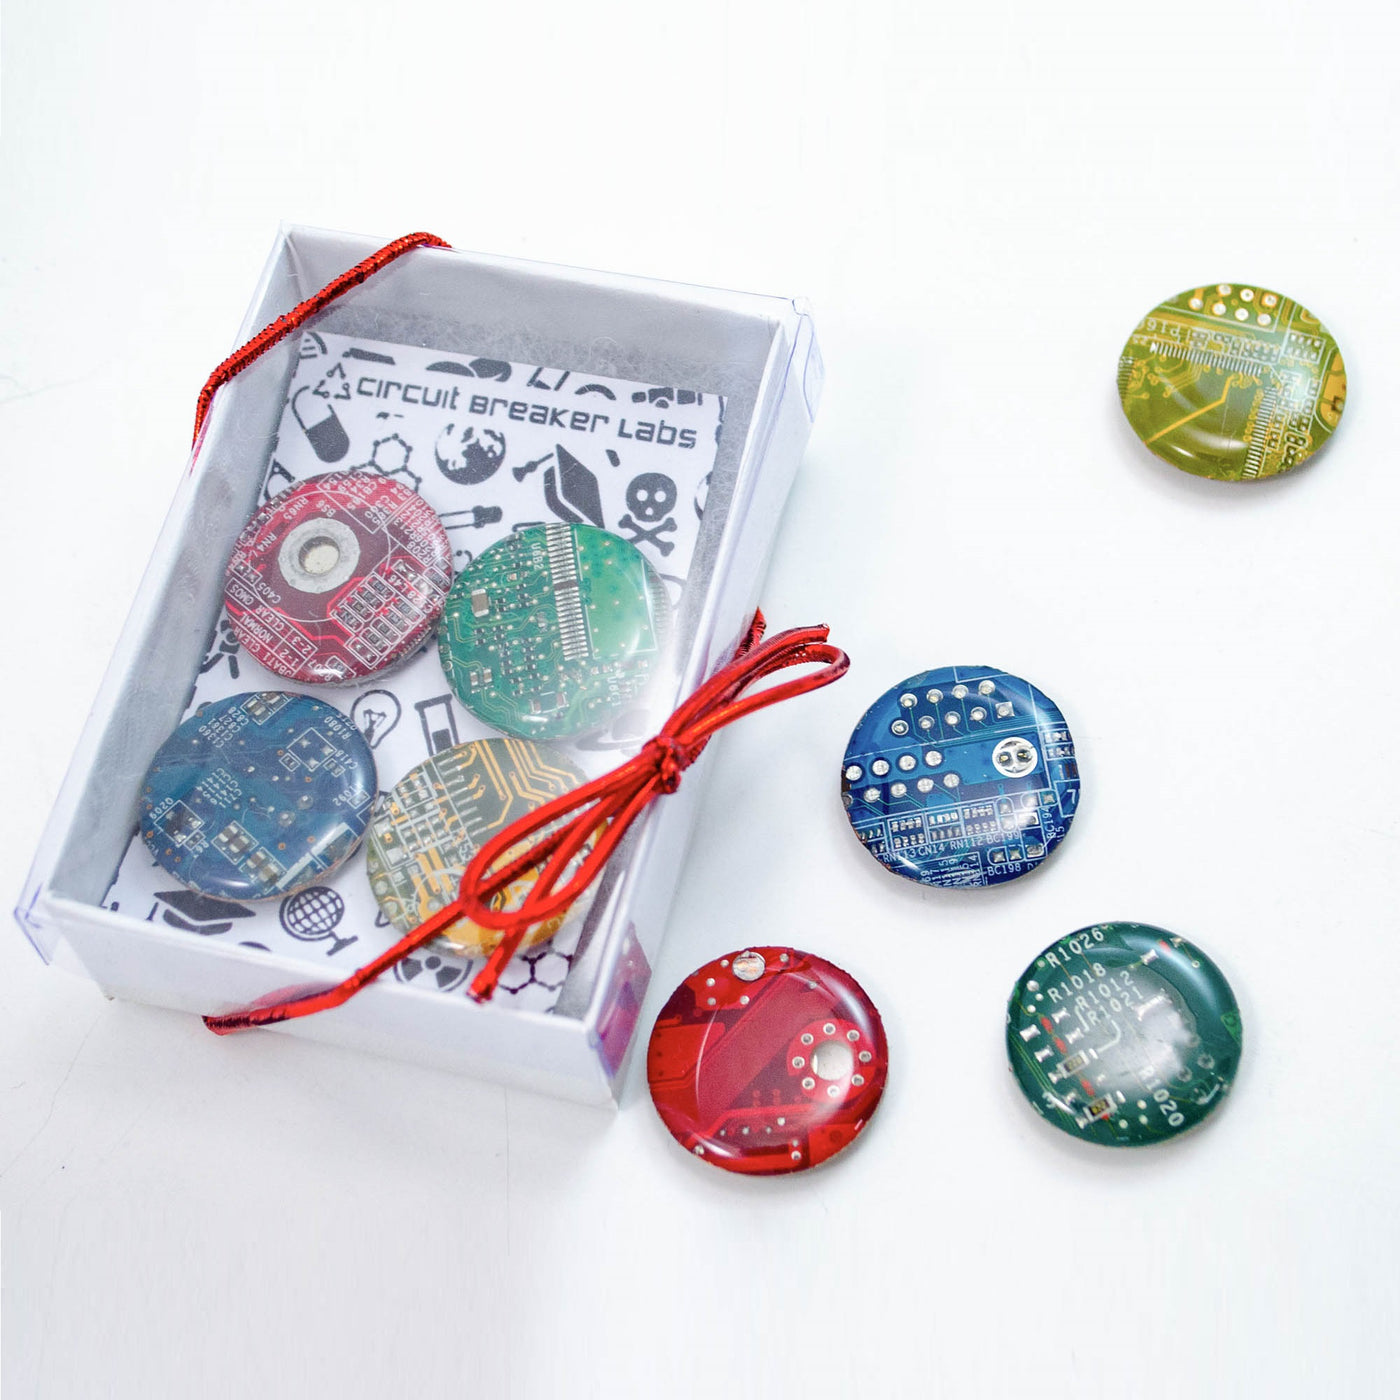 handmade circle magnets in red yellow, green, and blue made from recycled motherboards made in maryland